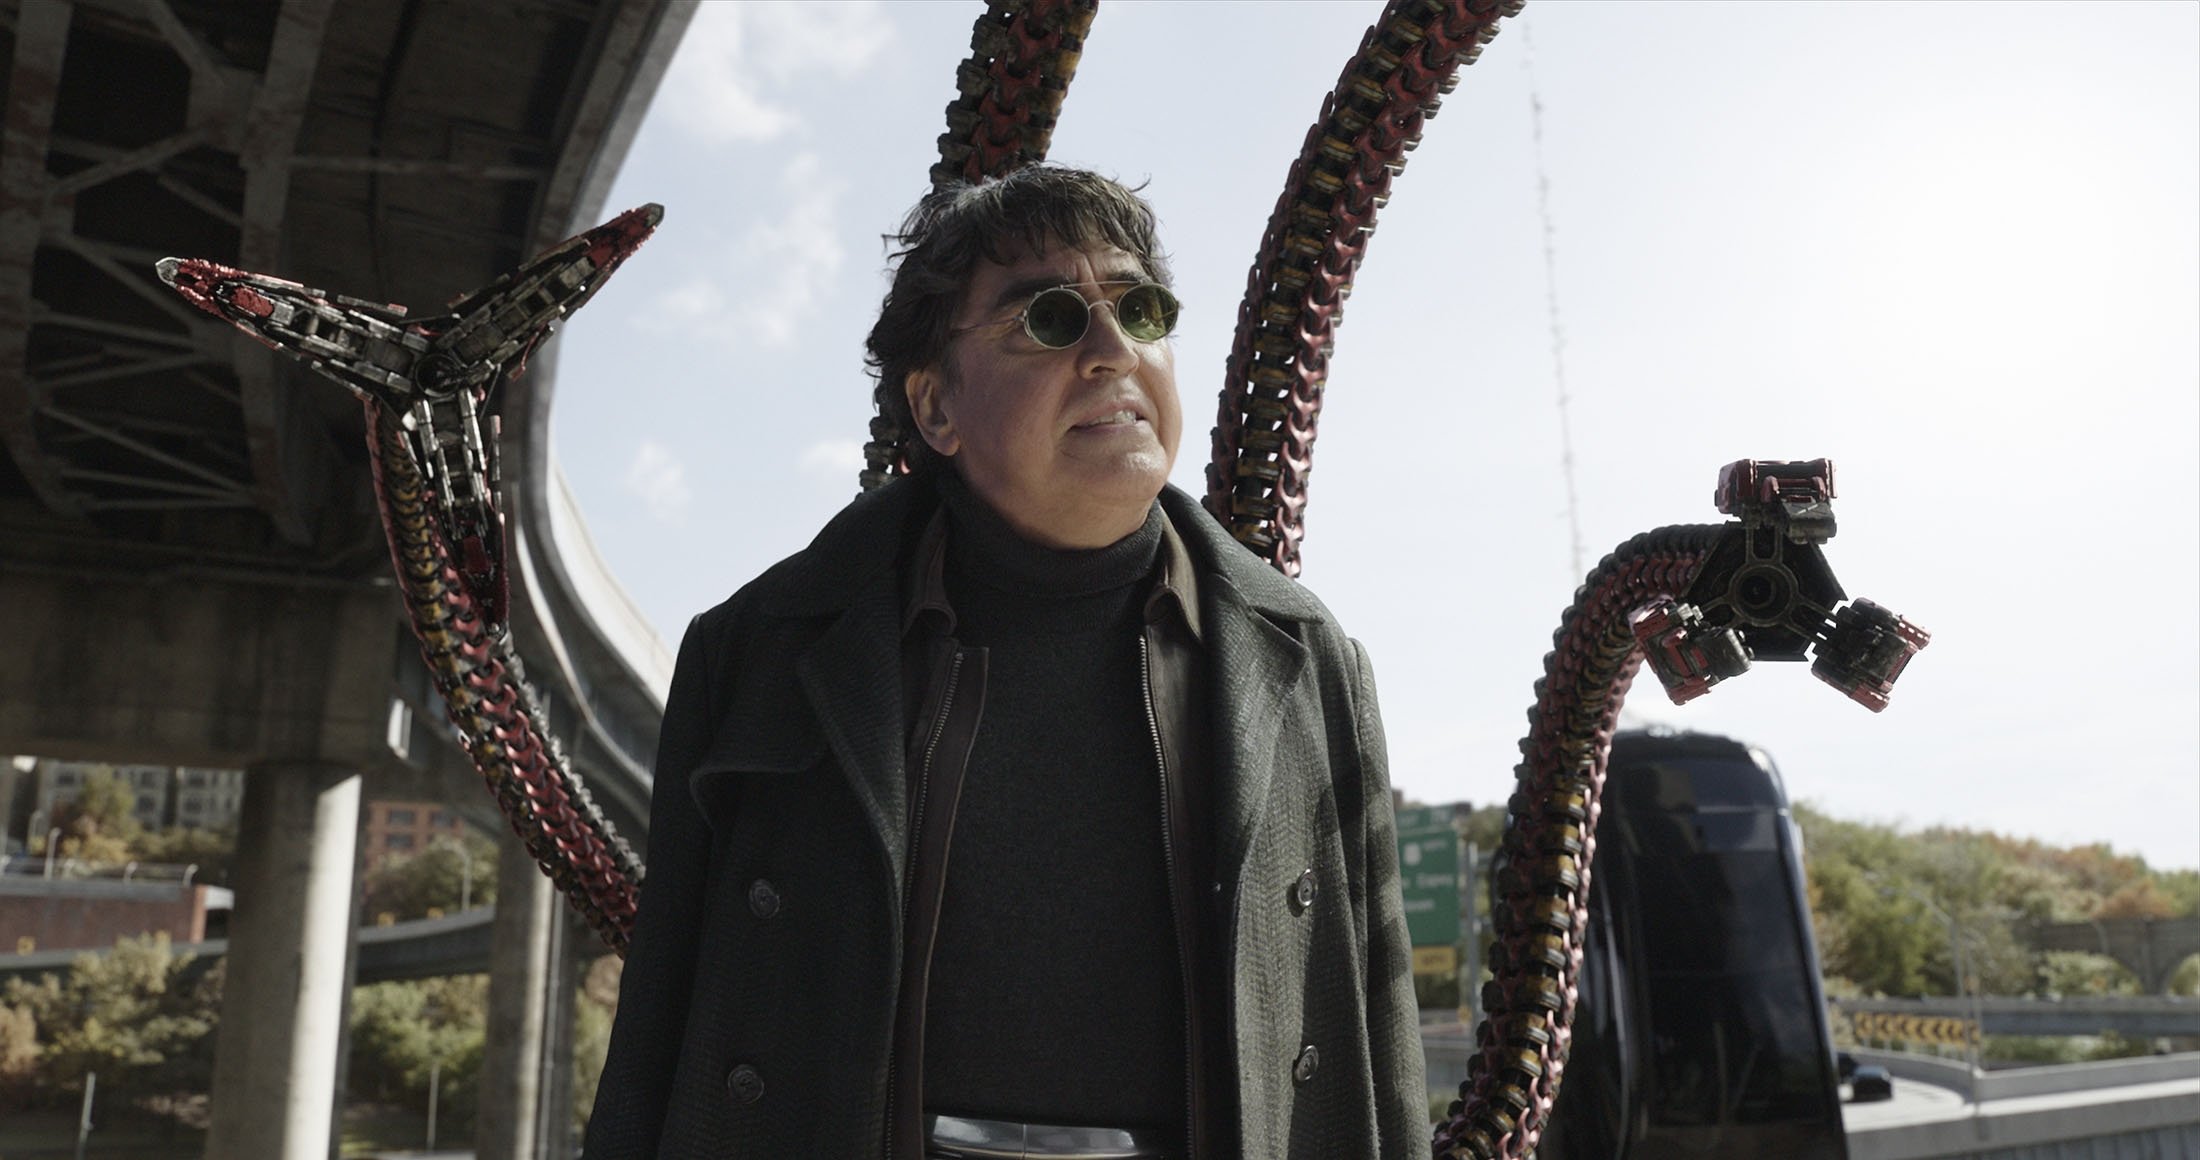 Alfred Molina as Doc Ock in a scene from the film “Spider-Man: No Way Home.” (Sony Pictures via AP)